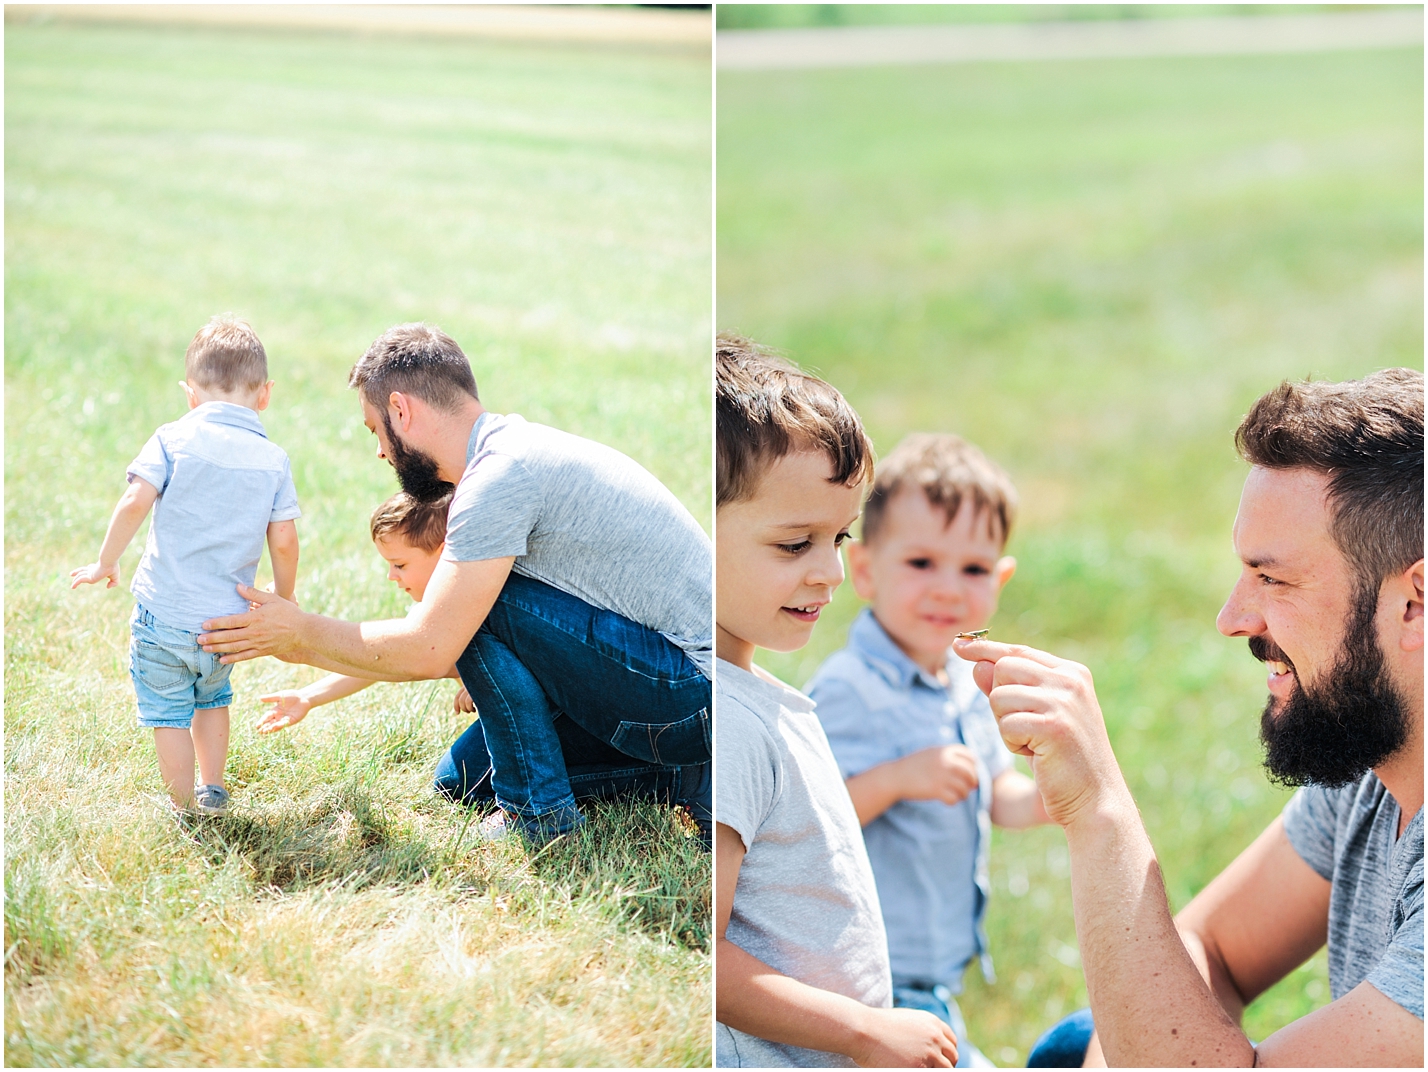 Beautiful-outdoor-family-portraits-in-a-field-schneider-family